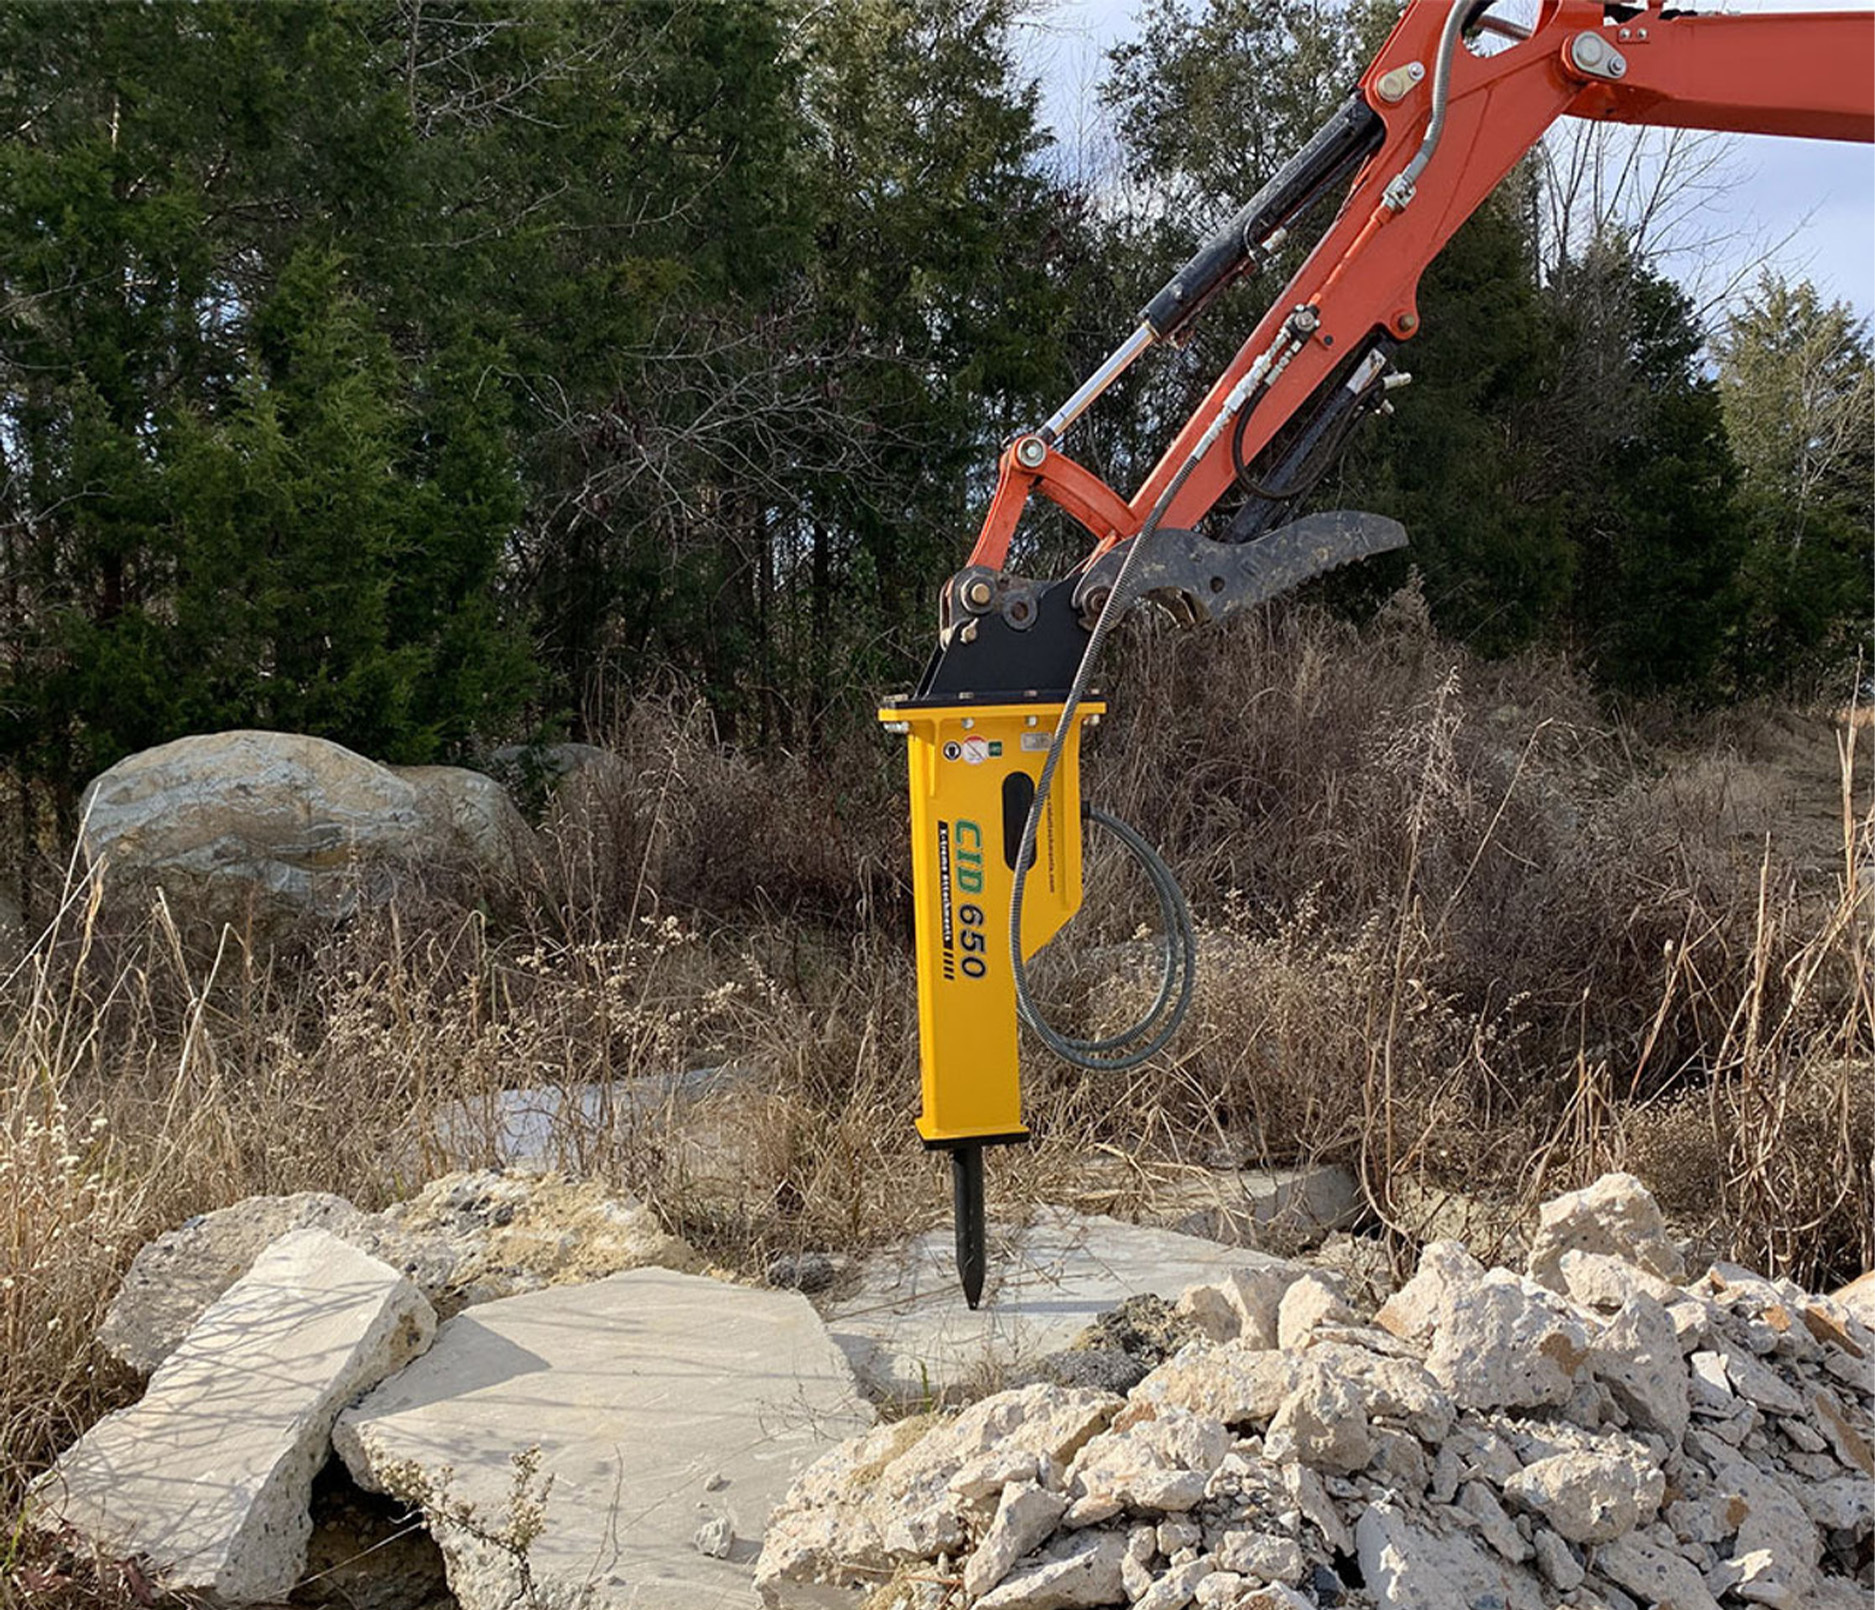 distant view of a cid excavator hydraulic concrete breaker attachment position over some rock 